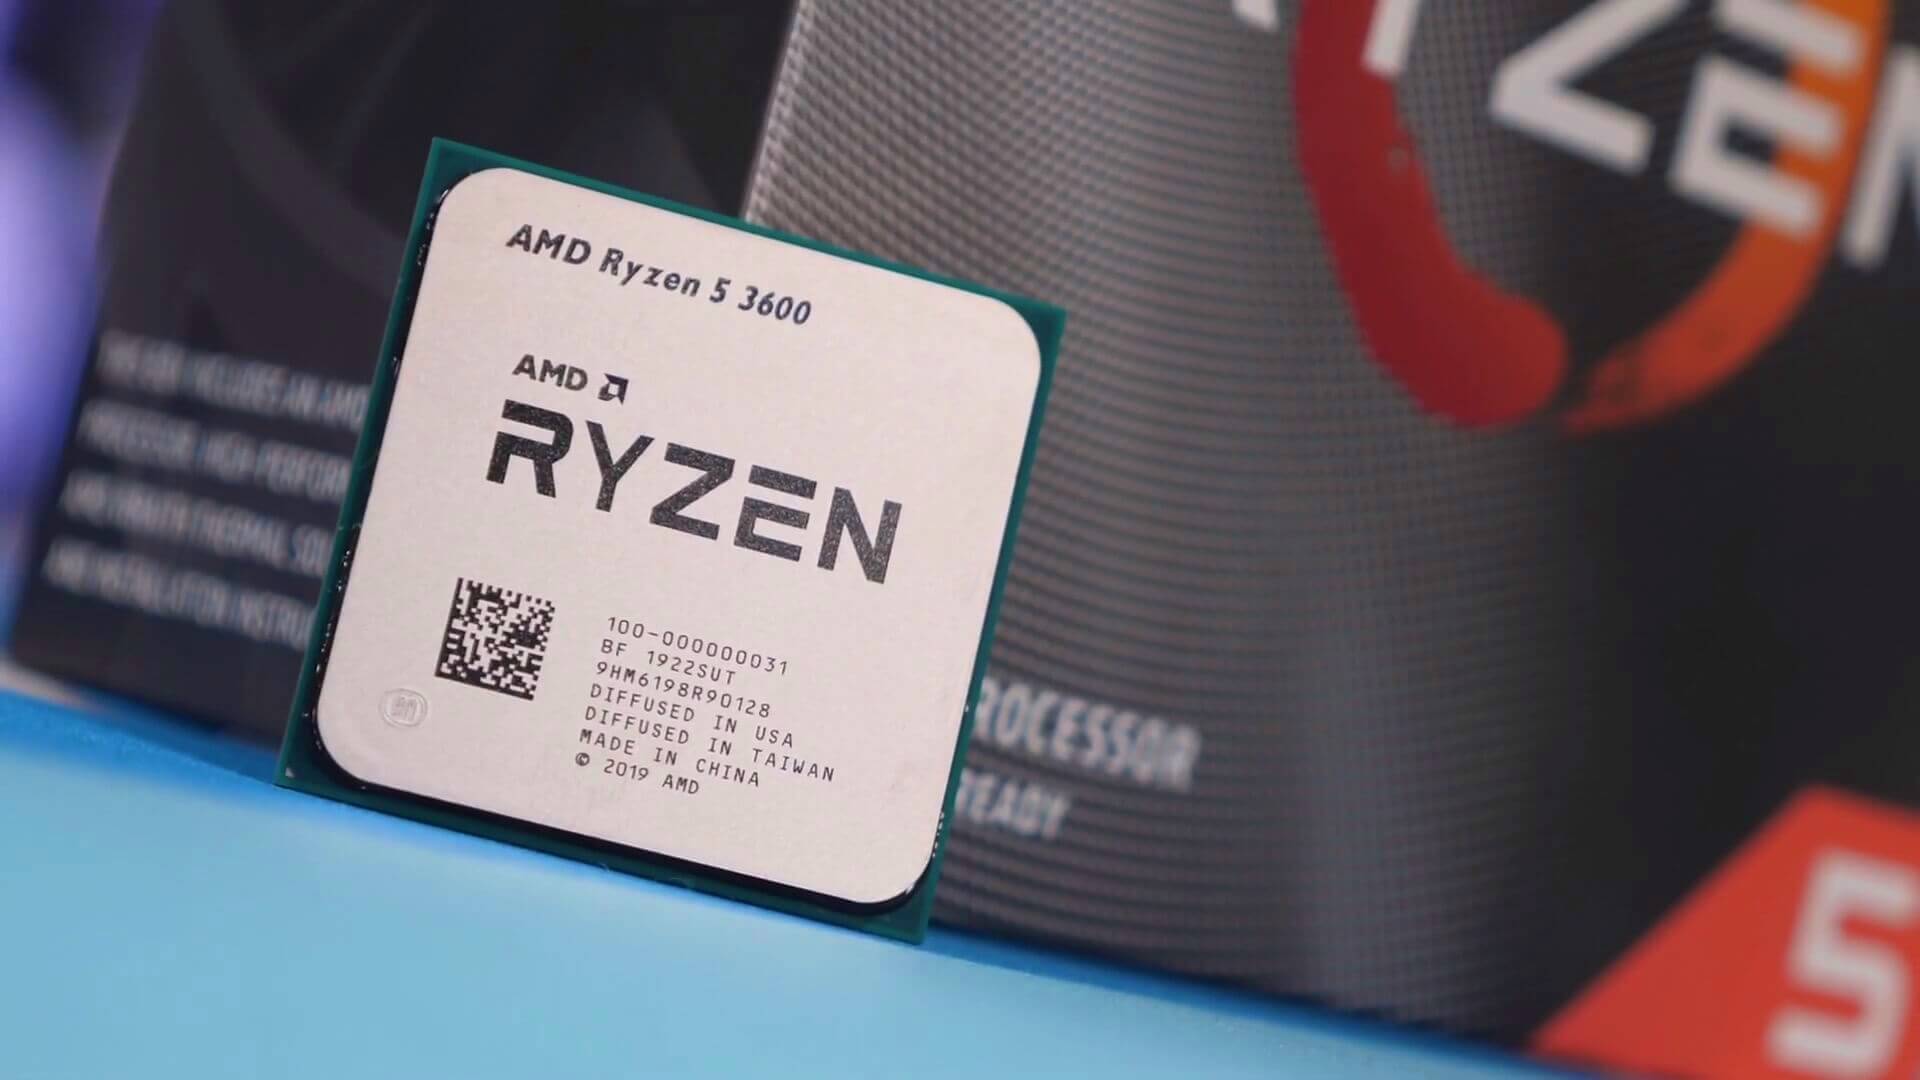 AMD's chiplet design affords massive cost-cutting opportunities